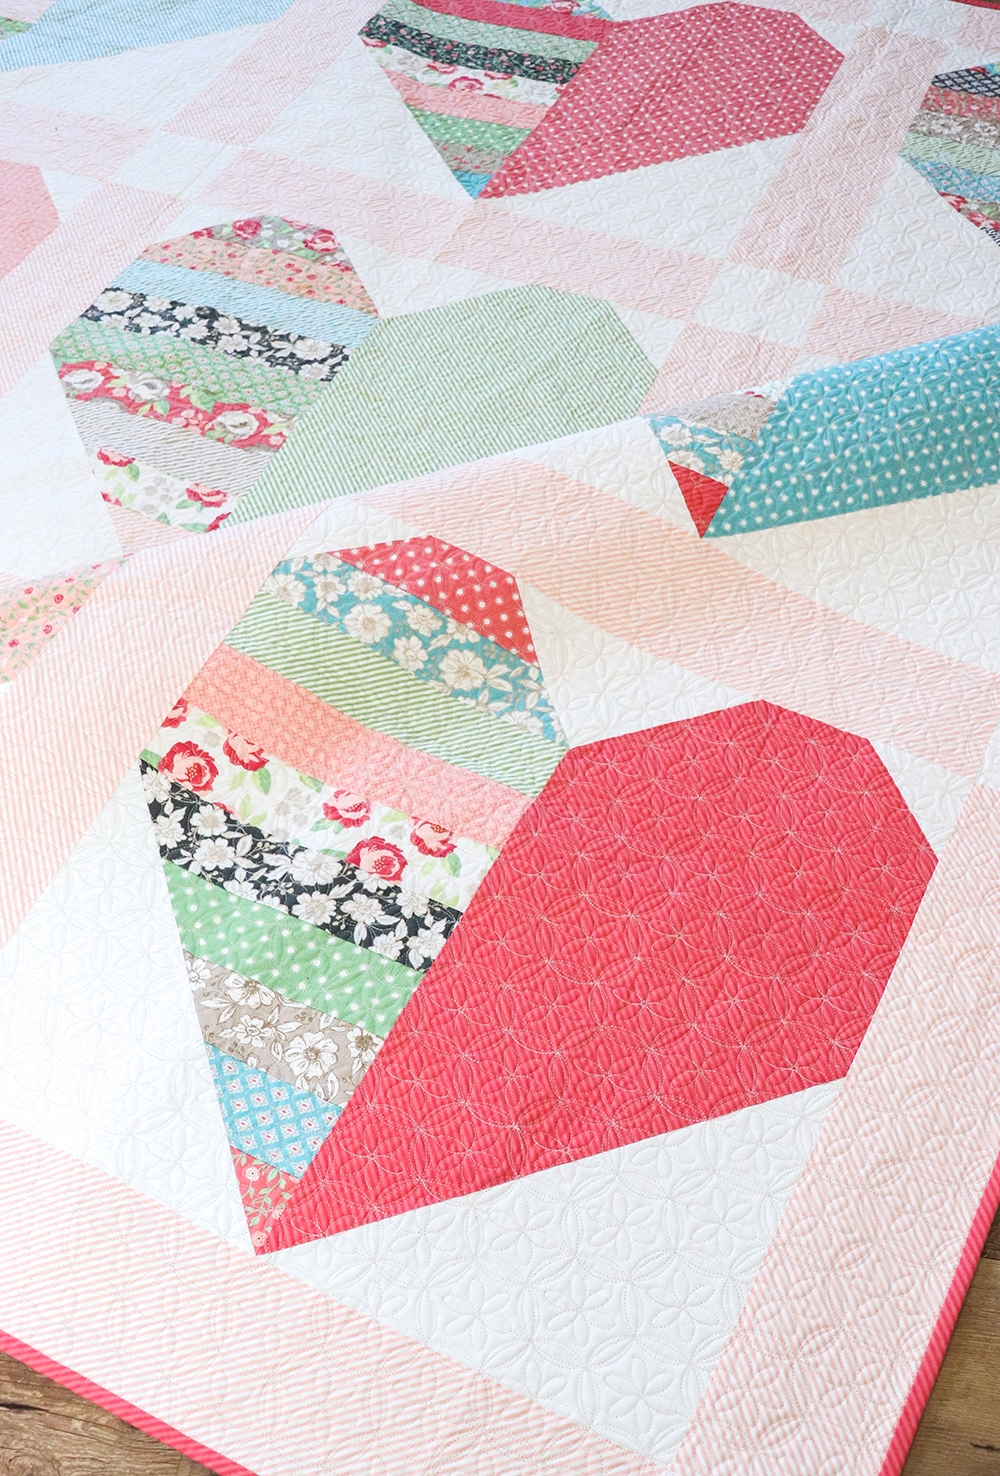 Heartthrob jelly roll heart quilt by Vanessa Goertzen of Lella Boutique. Pattern is from her book: Jelly Filled - 18 Quilts from 2-1/2" Strips. Fabric is Bloomington by Lella Boutique for Moda Fabrics.